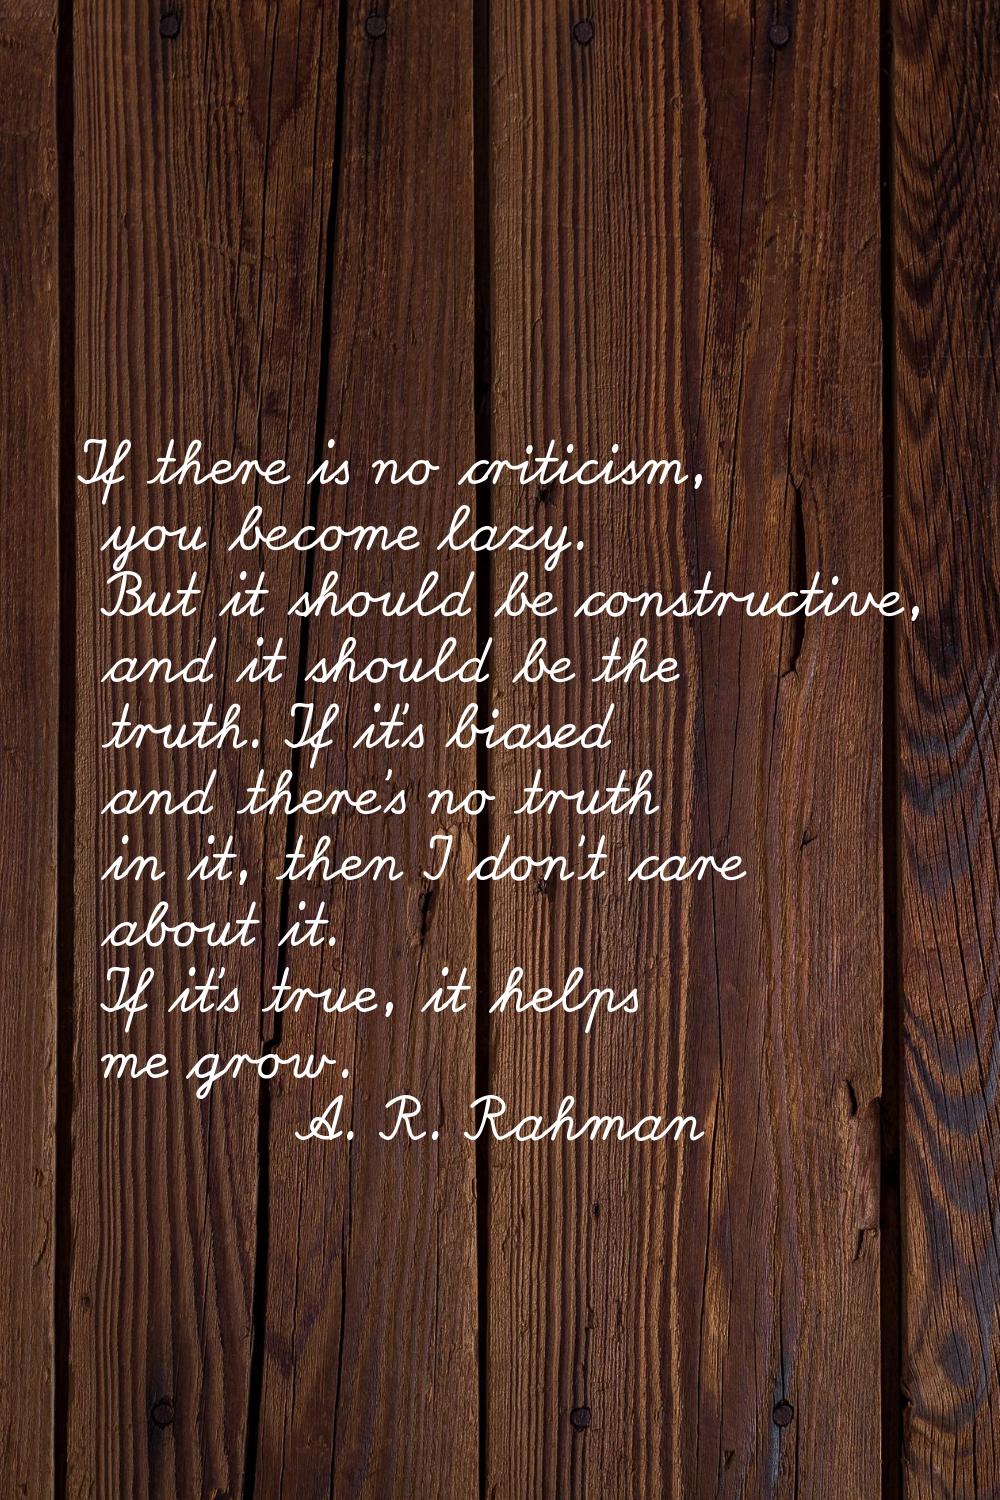 If there is no criticism, you become lazy. But it should be constructive, and it should be the trut